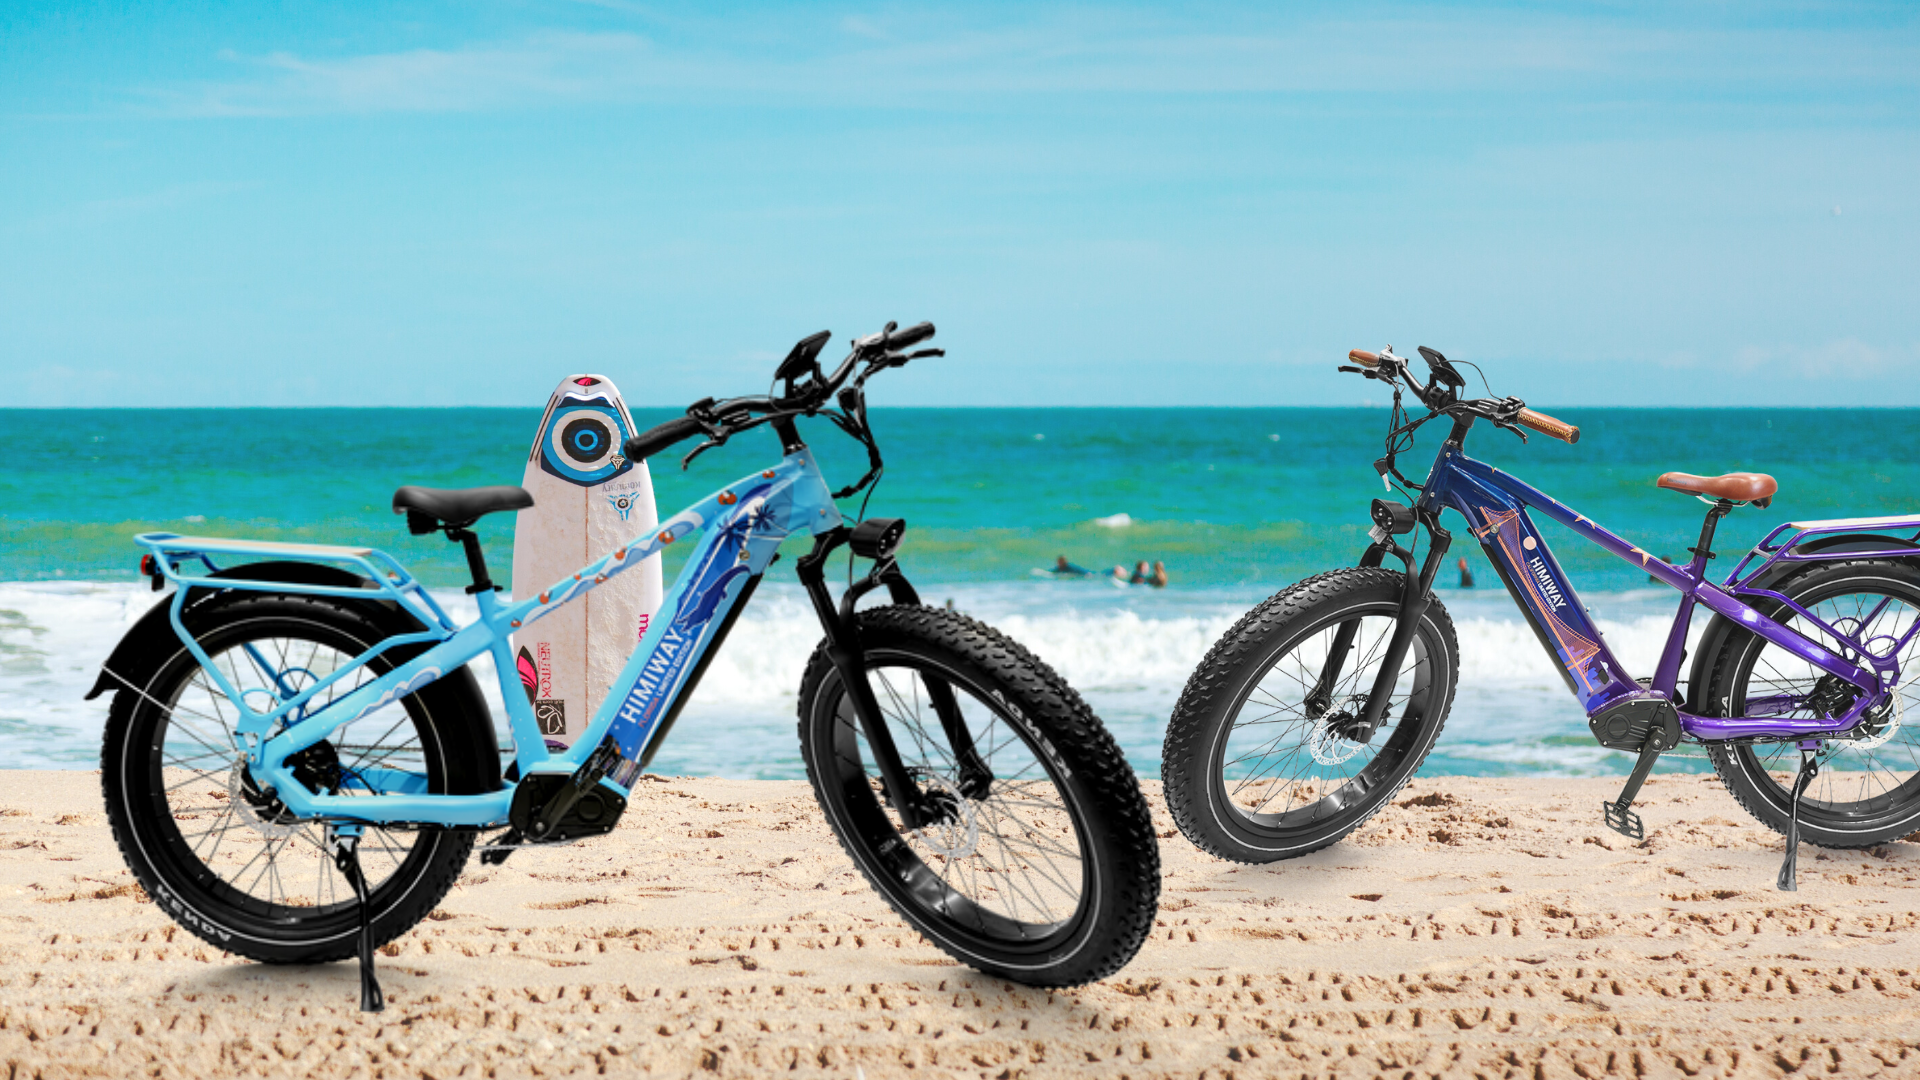 Limited edition ebike | Himiway